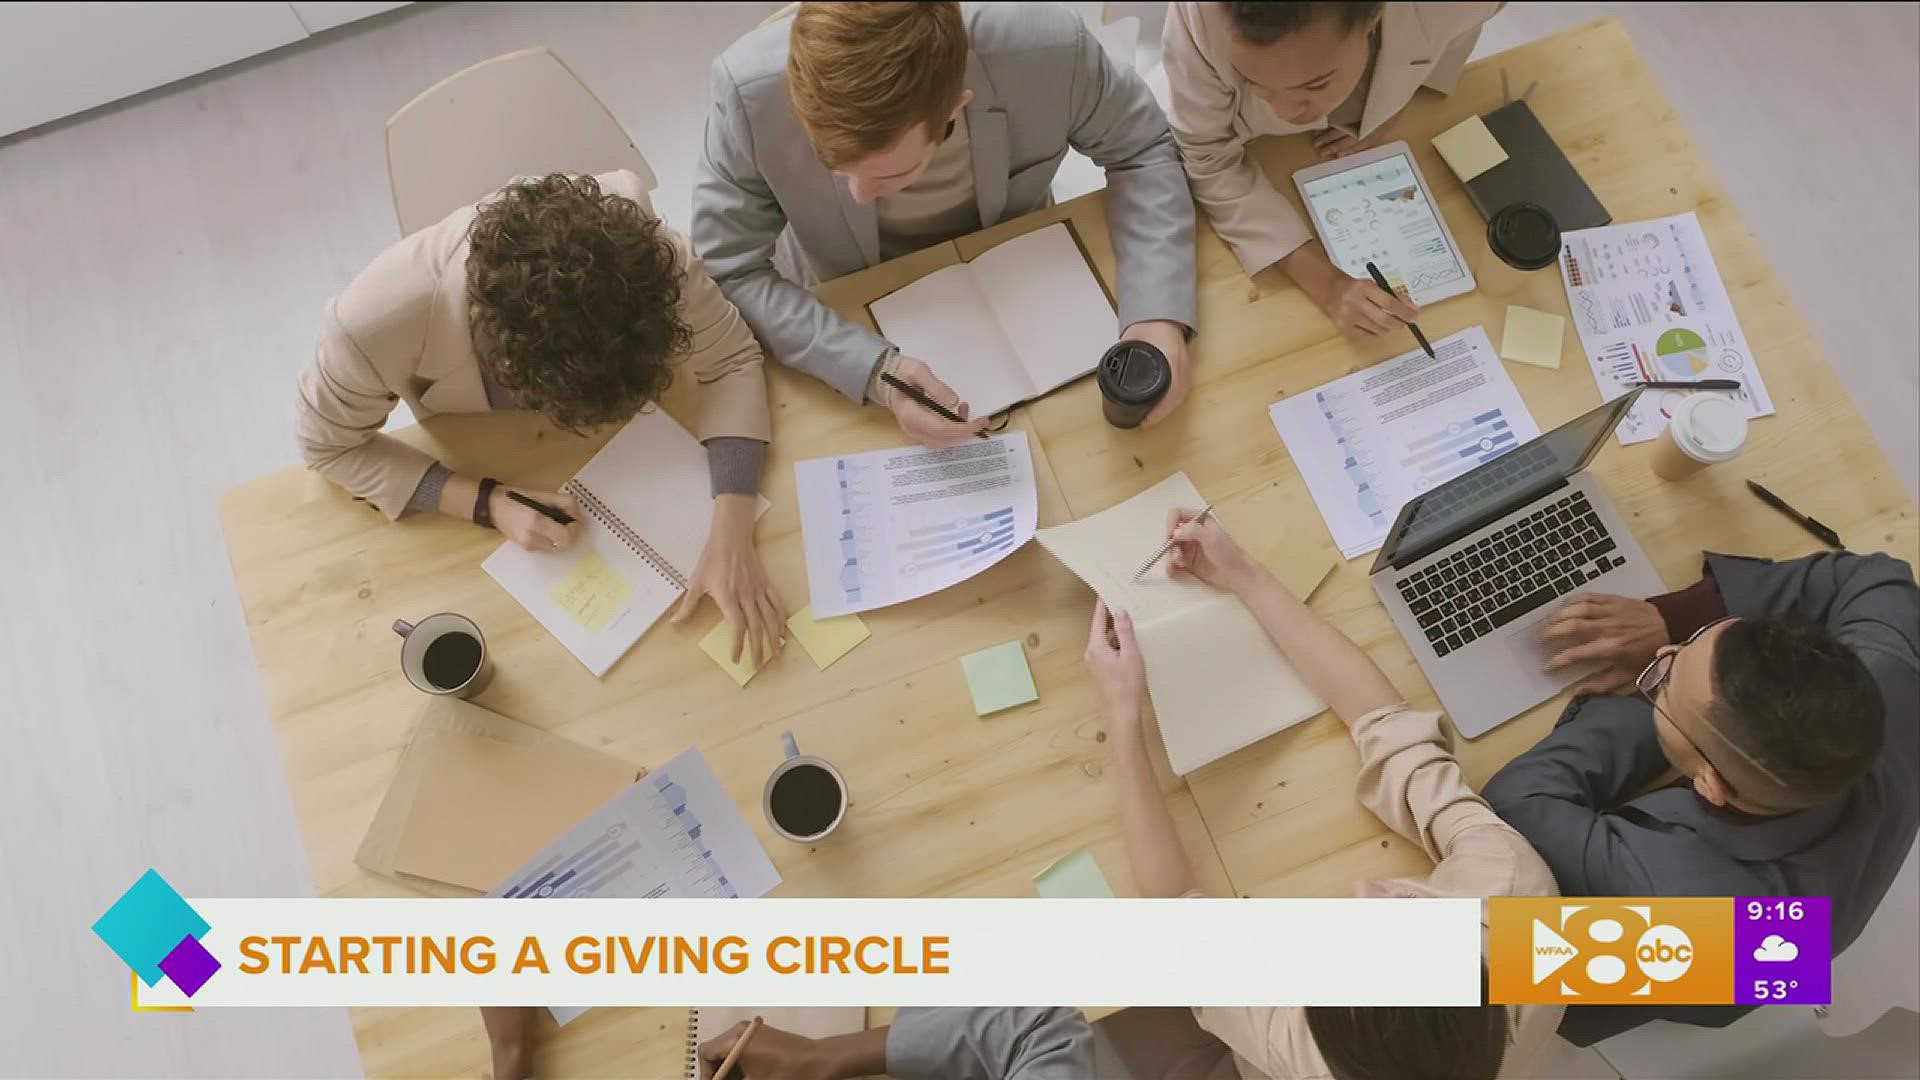 Ty Wilson with Philanthropy Together shares how giving circles diversify giving